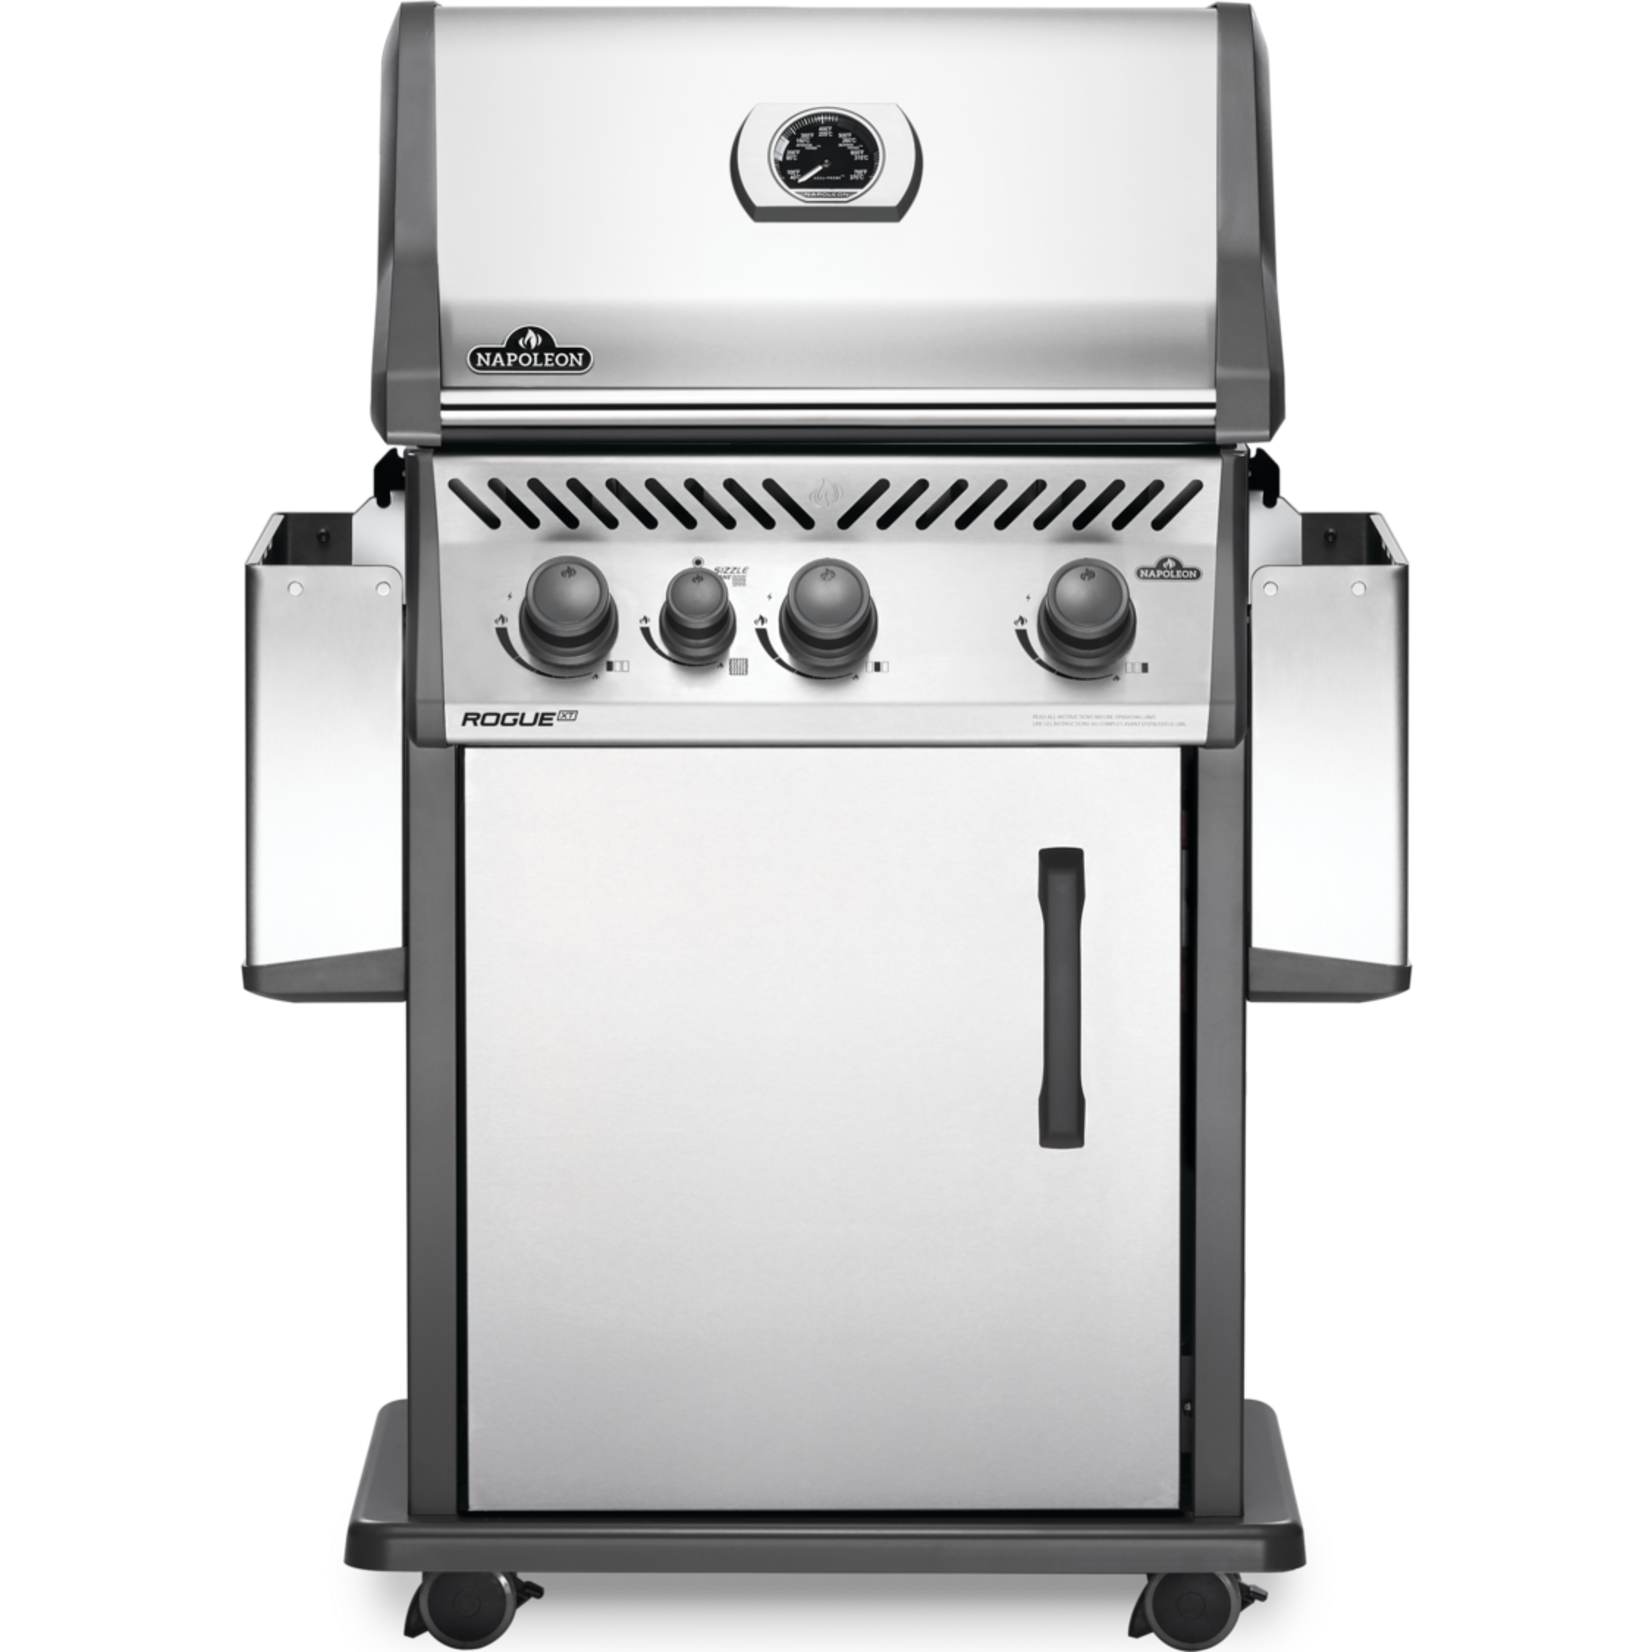 napoleon-rogue-xt-425-natural-gas-grill-with-infrared-side-burner